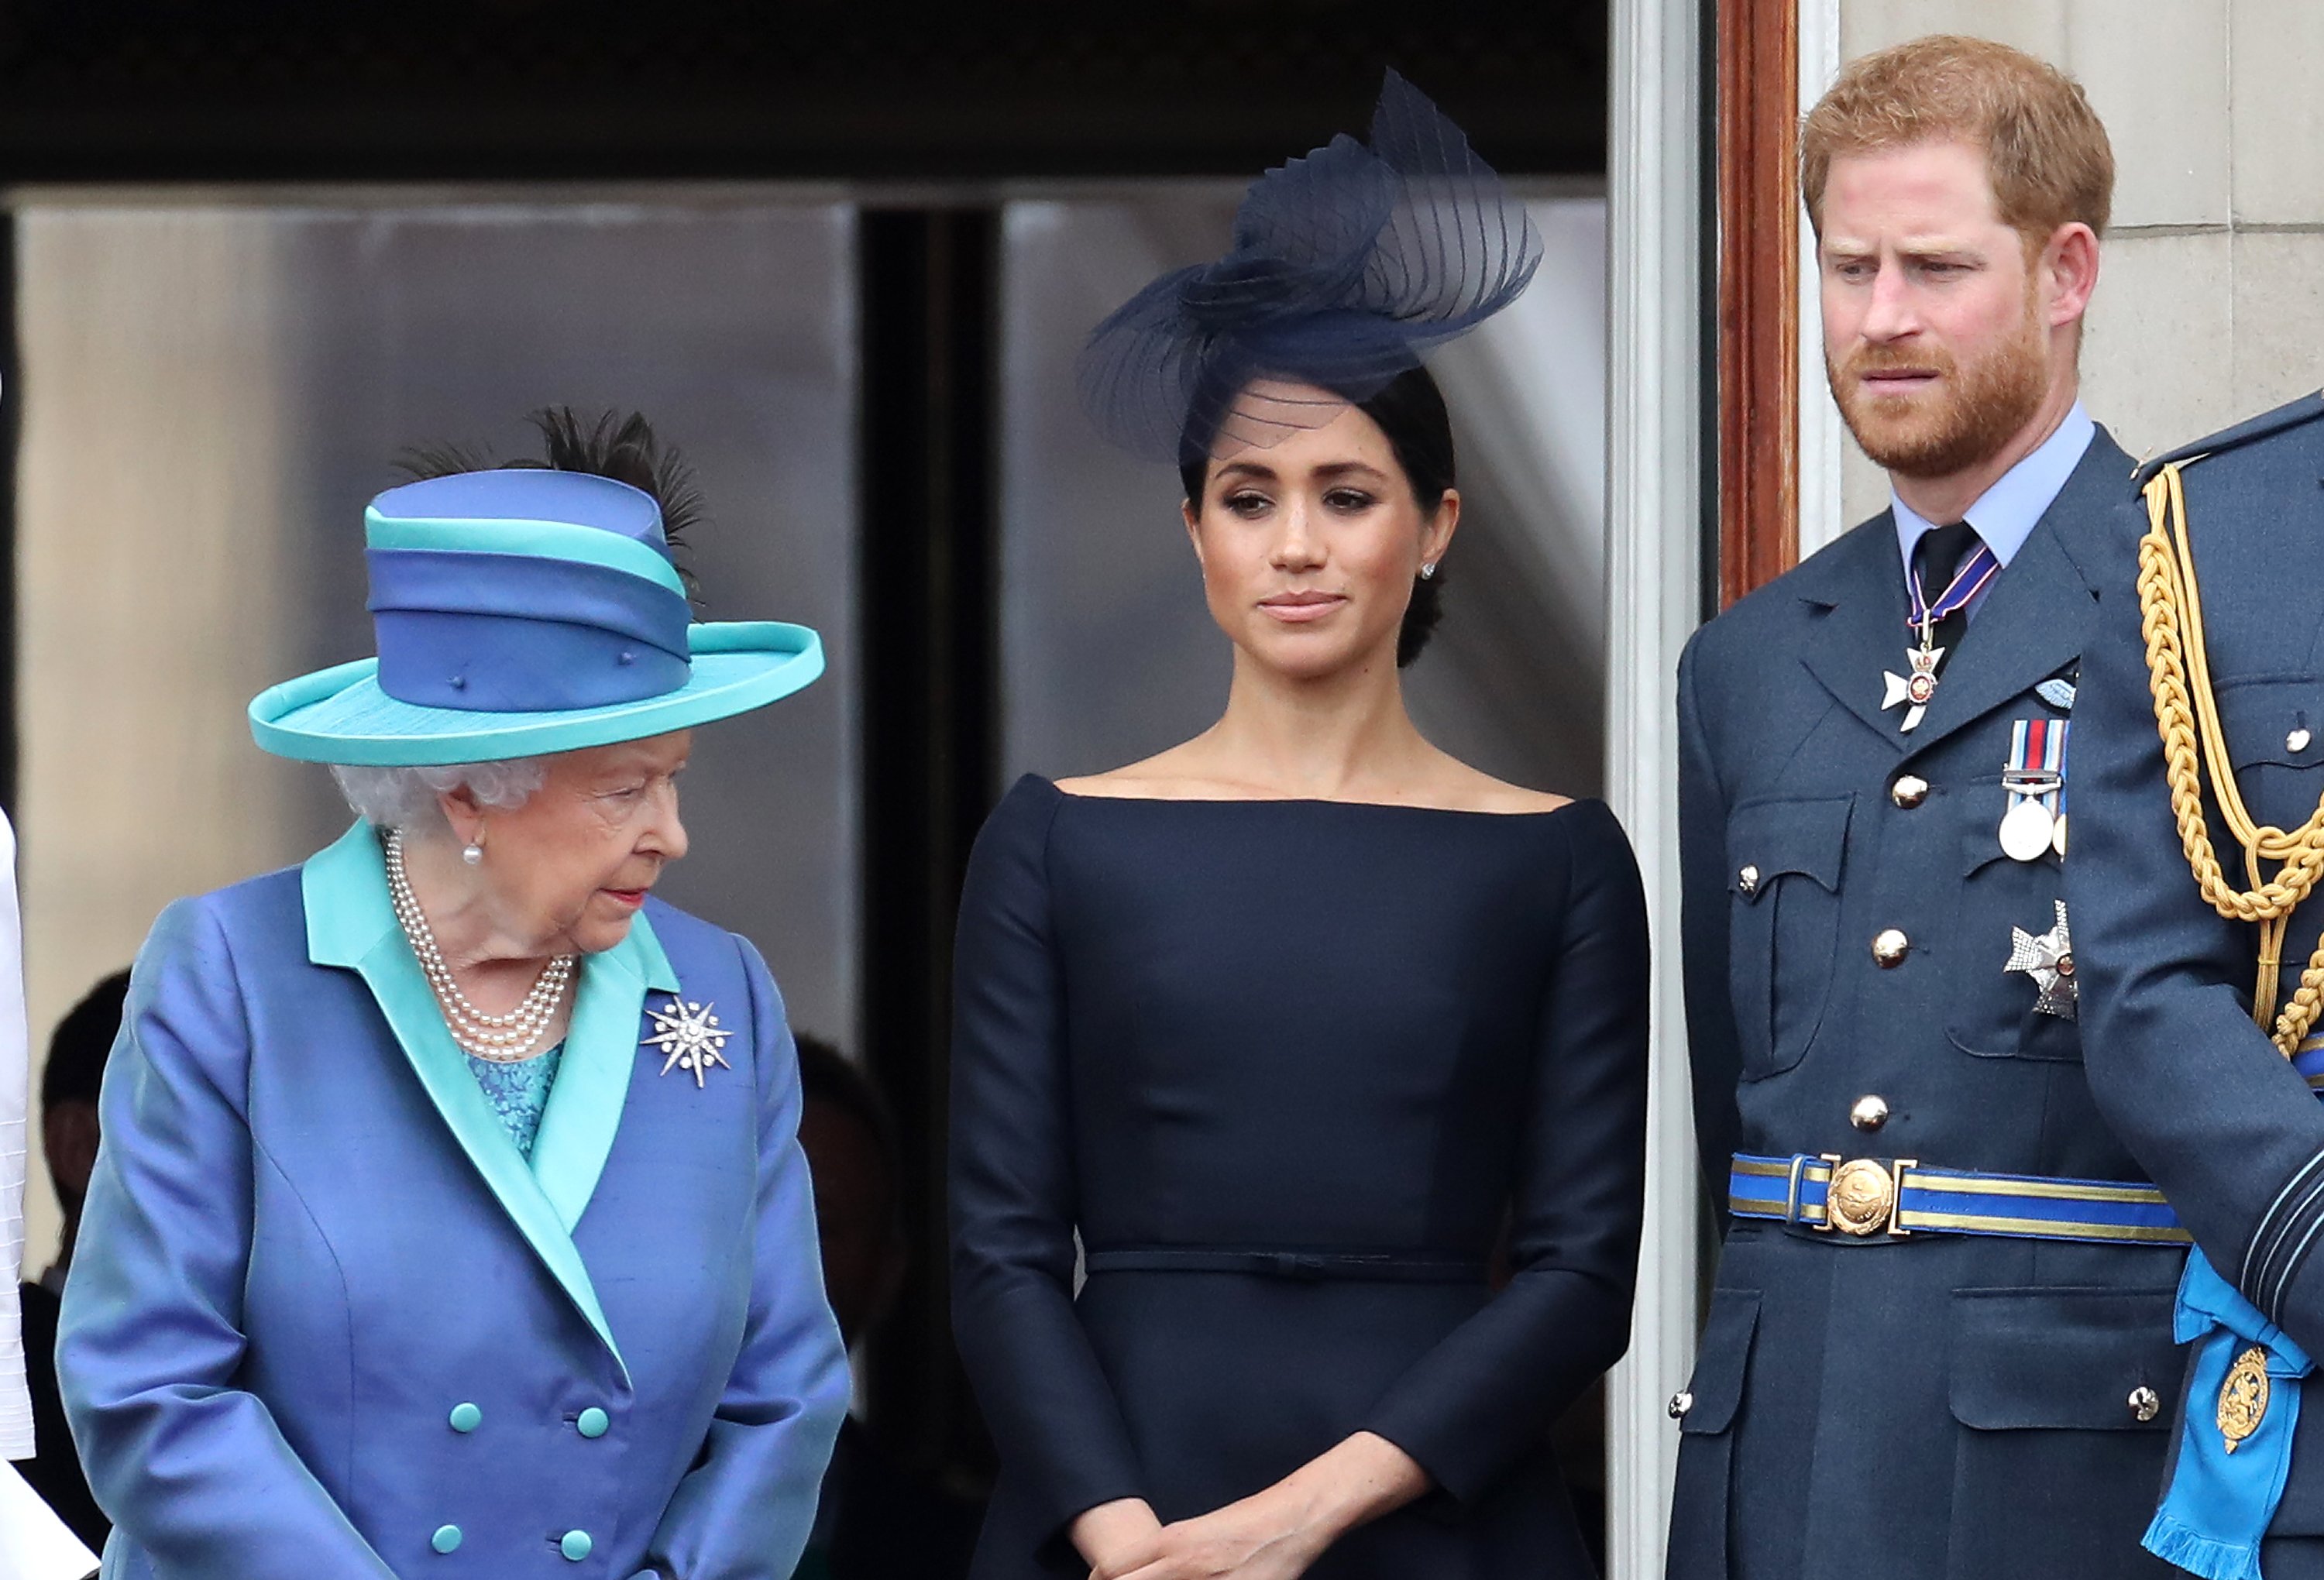 Queen Elizabeth II, Prince Harry, and Meghan Markle standing on the balcony of Buckingham Palace in 2018